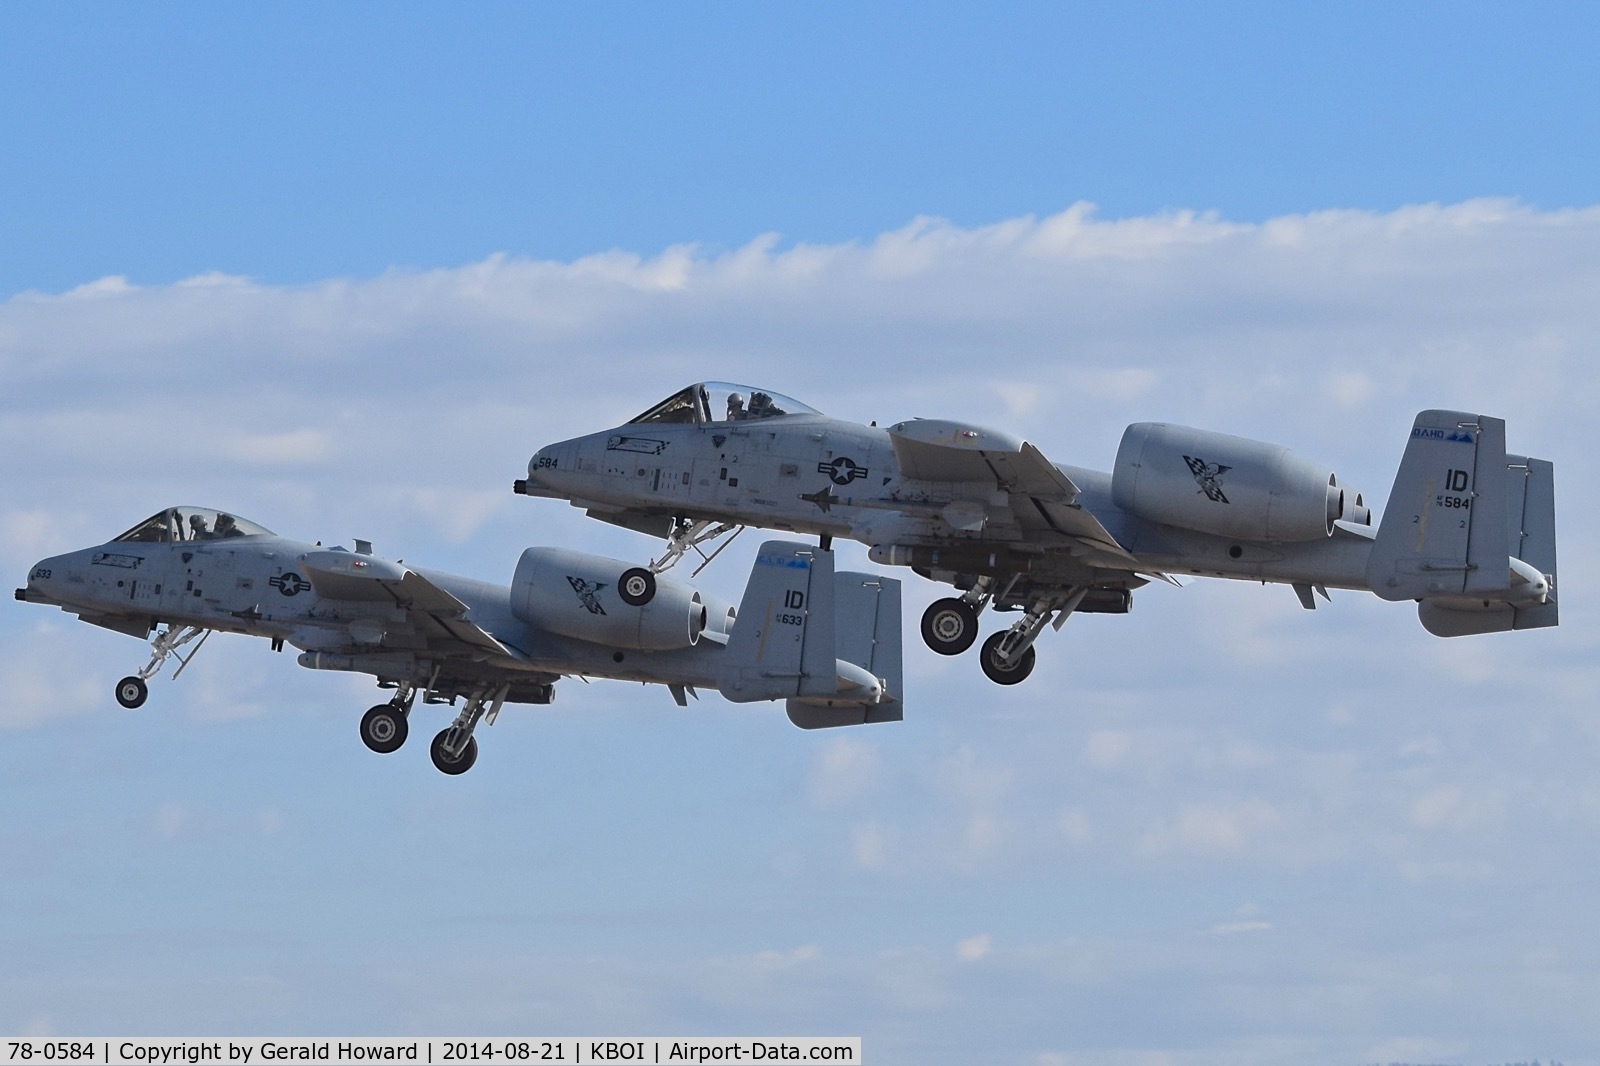 78-0584, 1978 Fairchild Republic A-10C Thunderbolt II C/N A10-0204, Formation take off from RWY 28L with 78-0633. 190th Fighter Sq., 124th Fighter Wing, Idaho ANG.